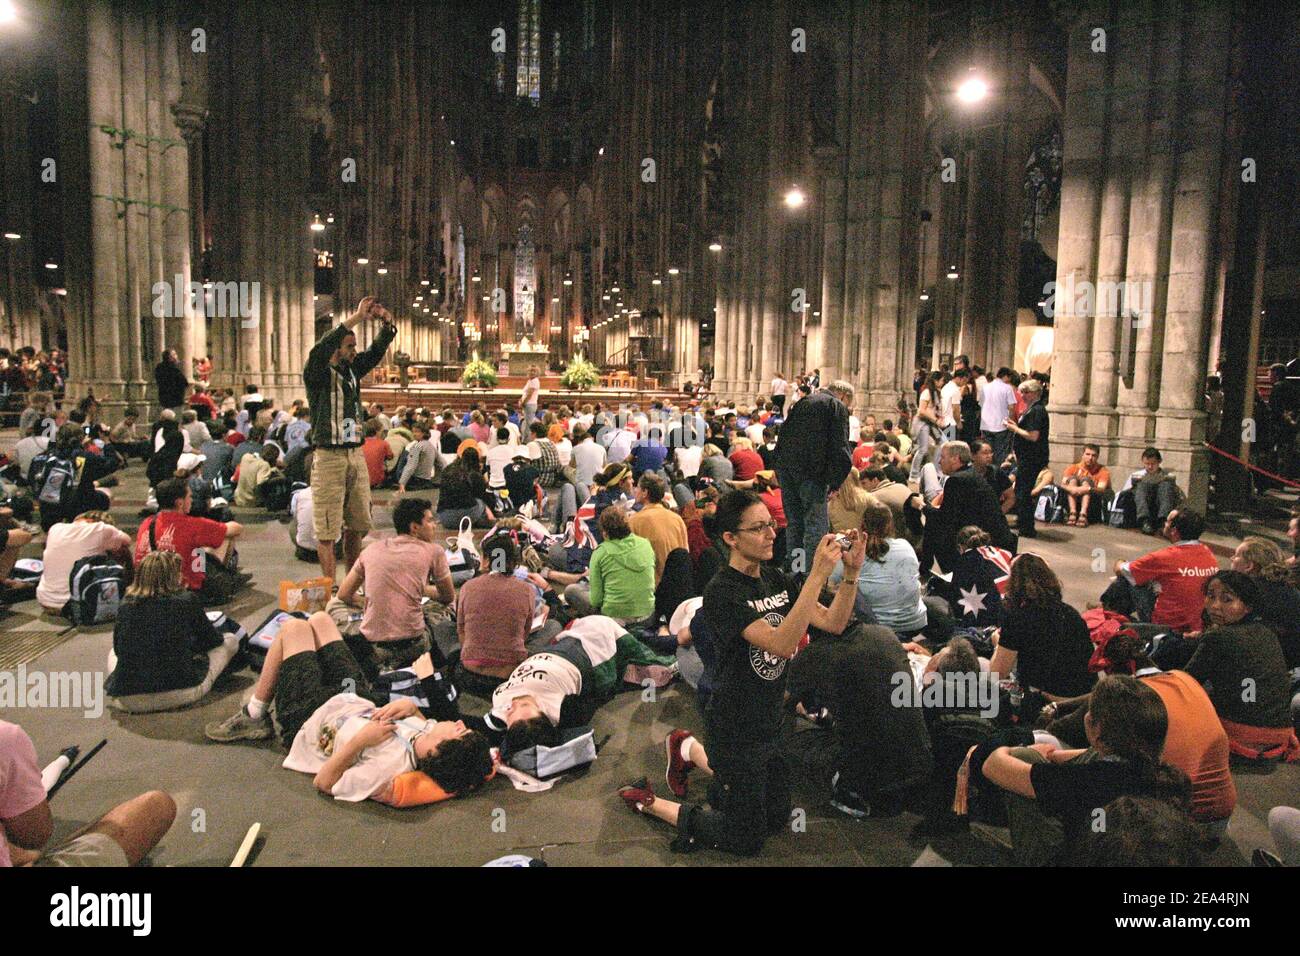 Thousands of pilgrims streamed into the west German city of Cologne on Wednesday, August 17, 2005, for the Roman Catholic Church's 20th World Youth Day, visiting the city's historic cathedral and awaiting a four-day visit from Pope Benedict XVI scheduled to arrive on August 18. Photo by Douliery-Zabulon/ABACAPRESS.COM. Stock Photo